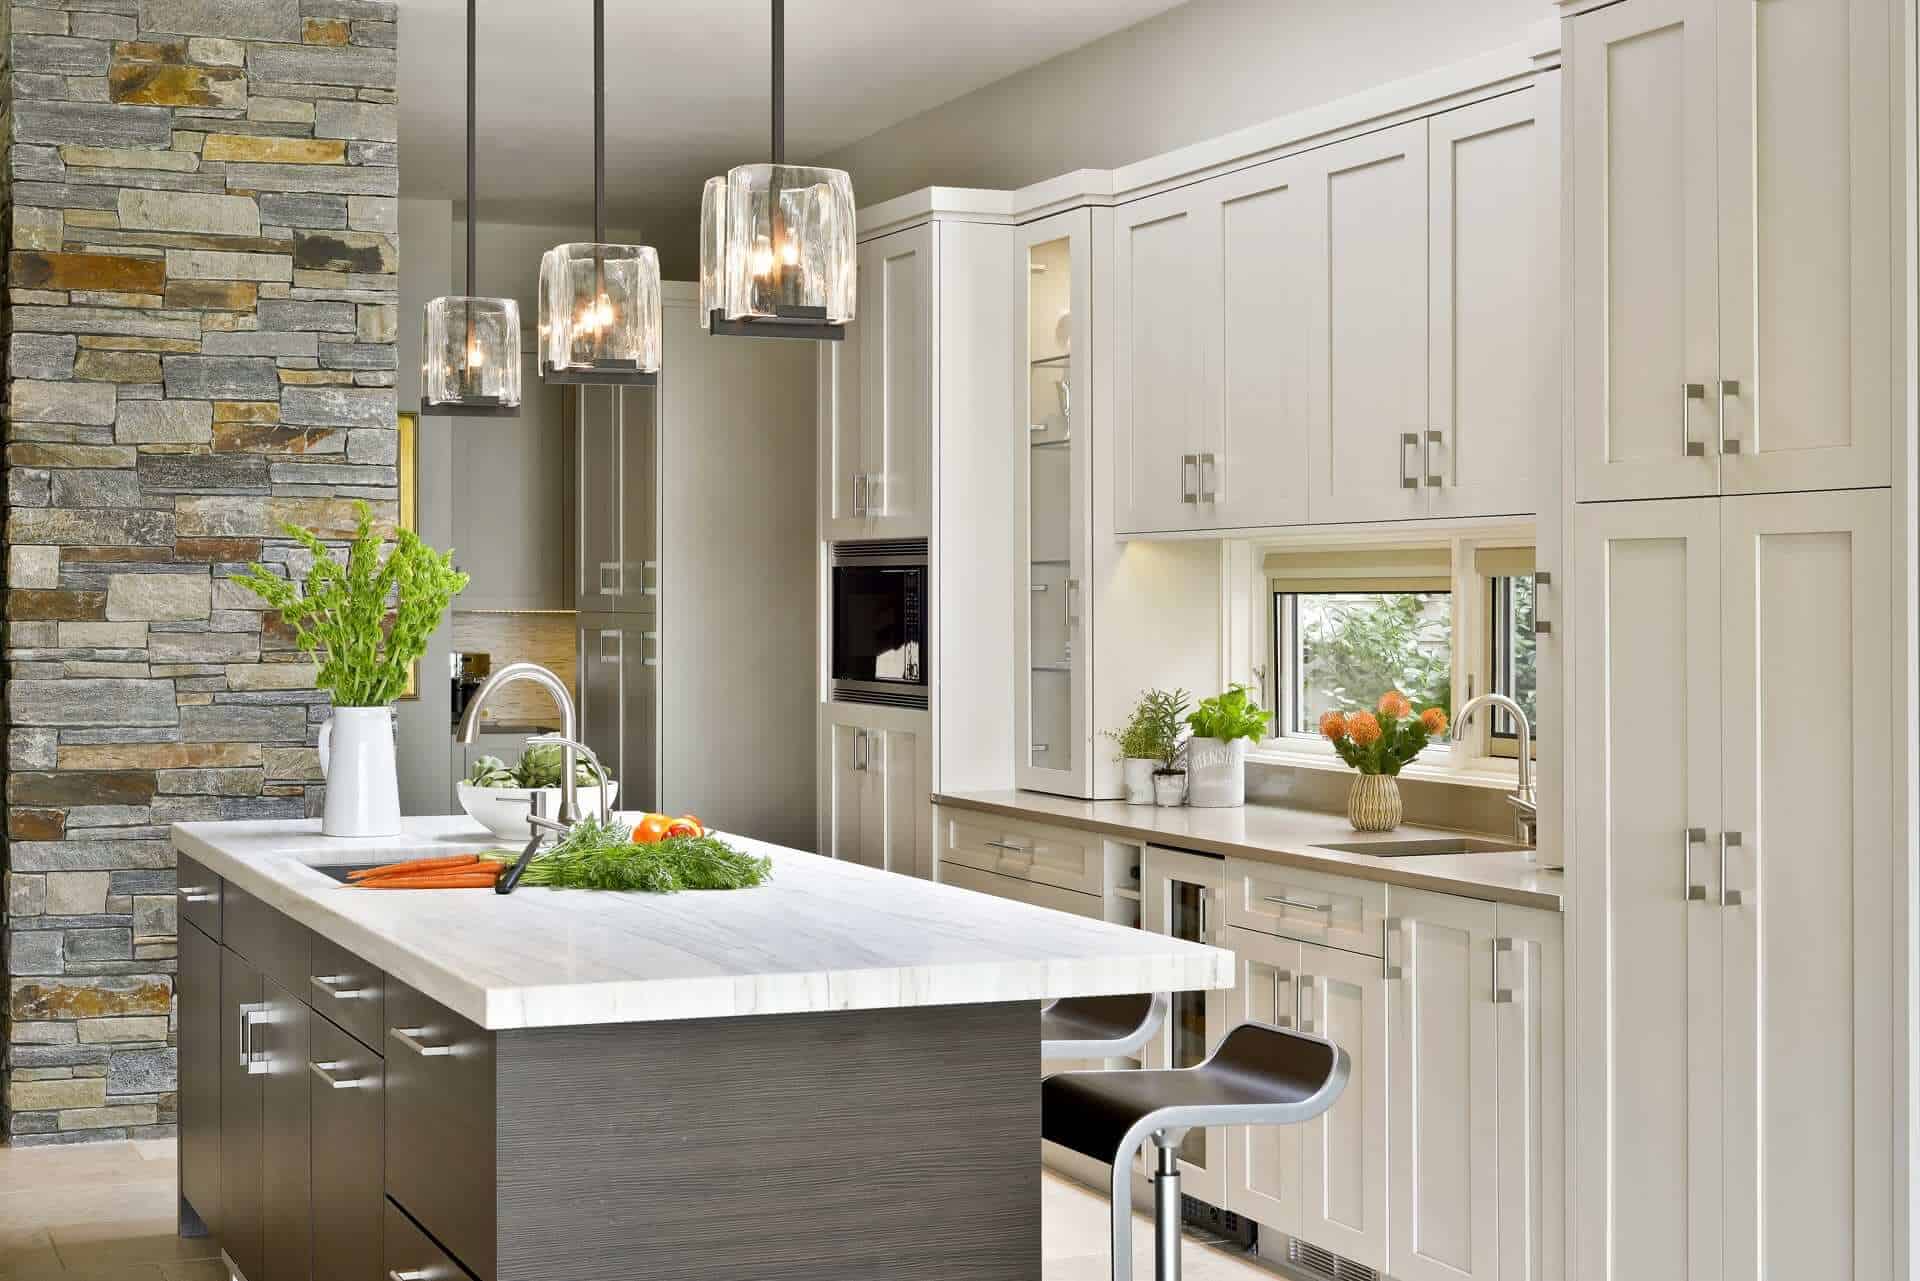 Artcraft Moveno horizontal grained island with quartz top is accented by glass cube pendant lights.